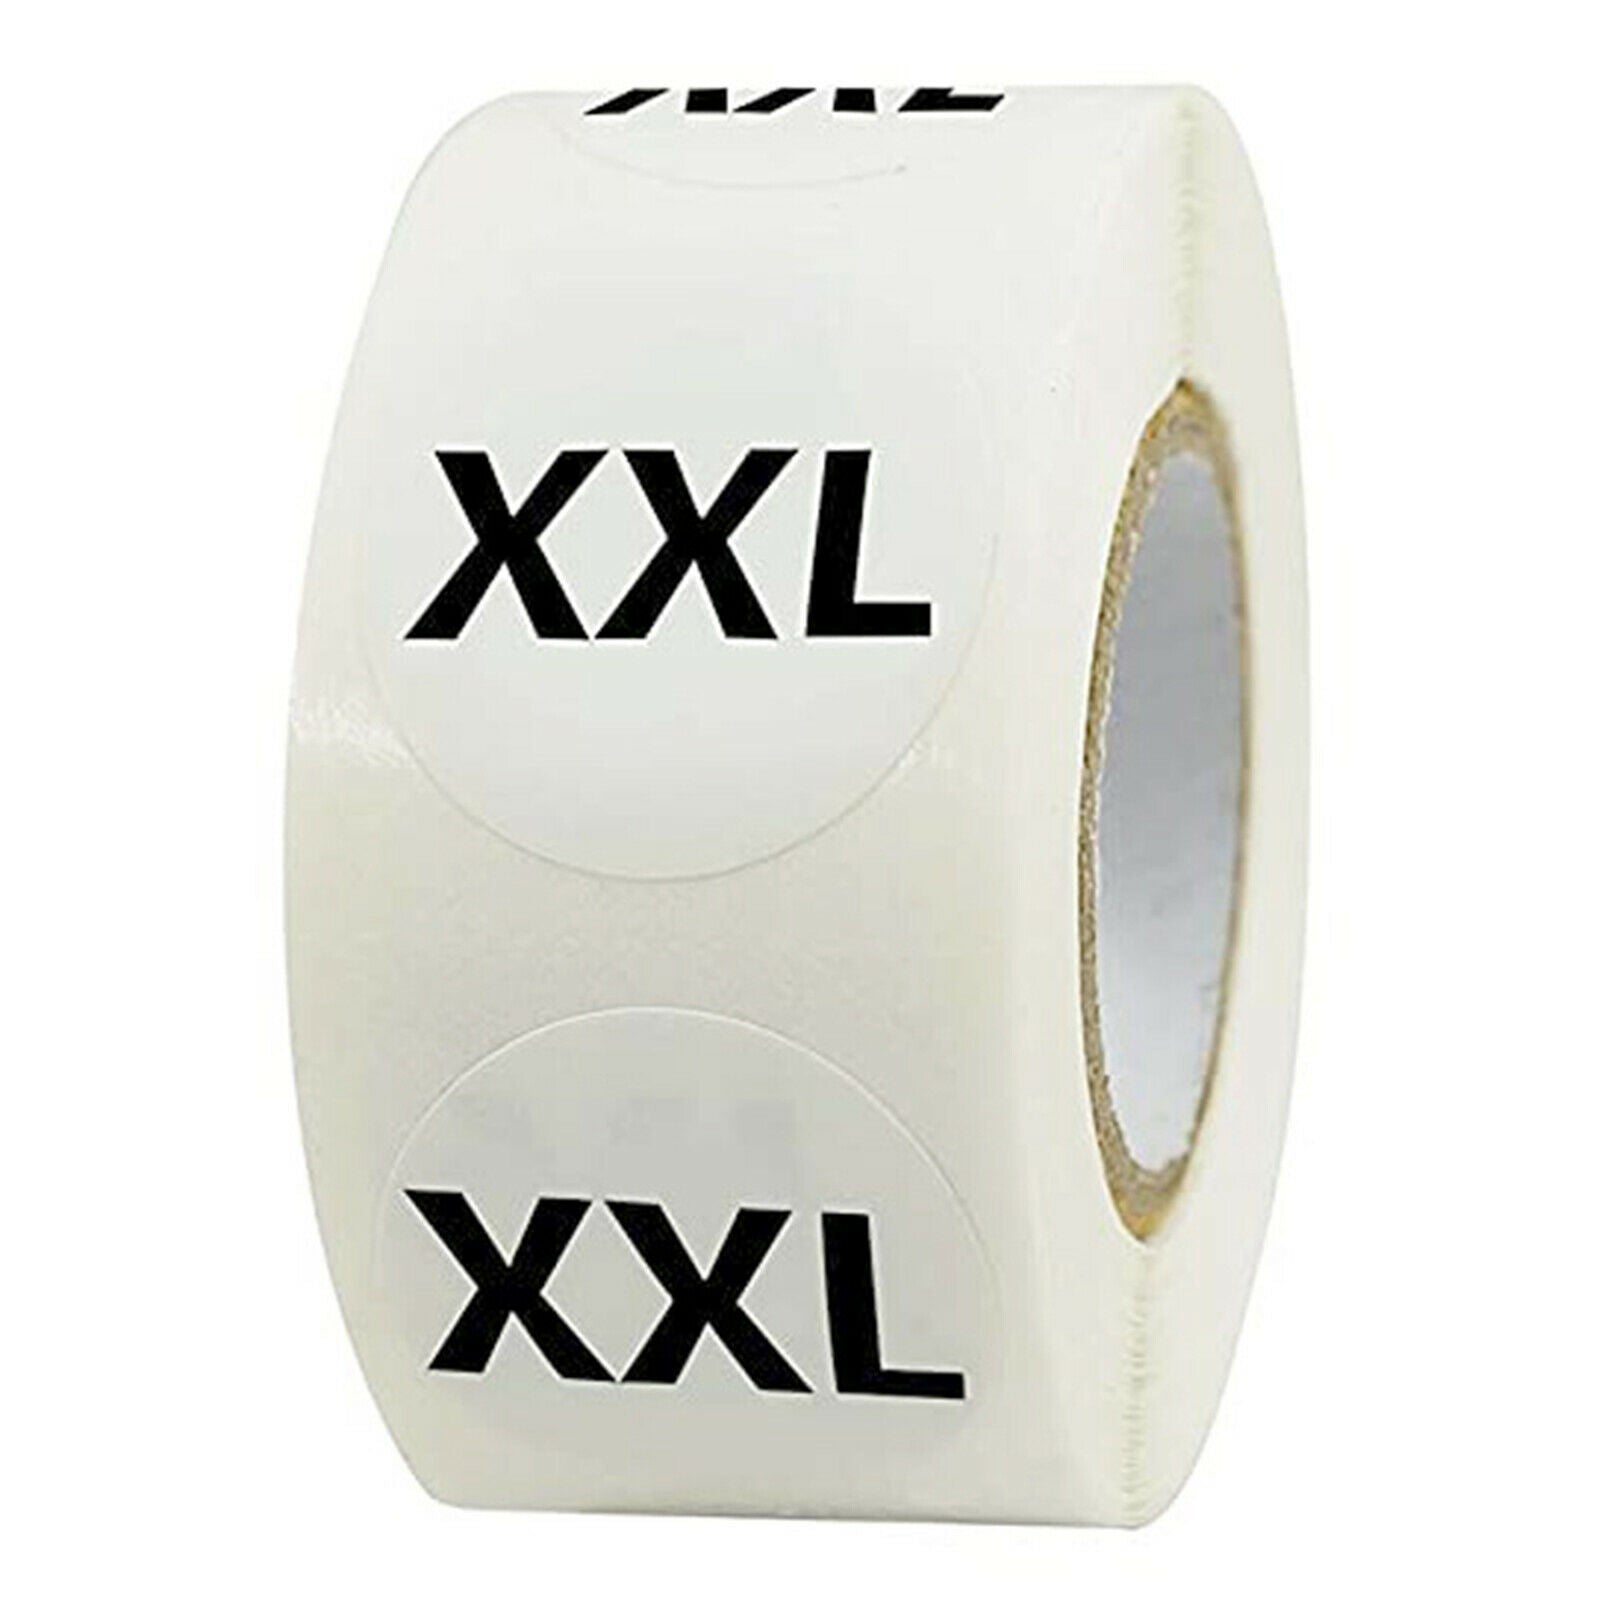 Clothing Size Stickers, 7Roll Round Clothing Labels Stickers All 7 Sizes